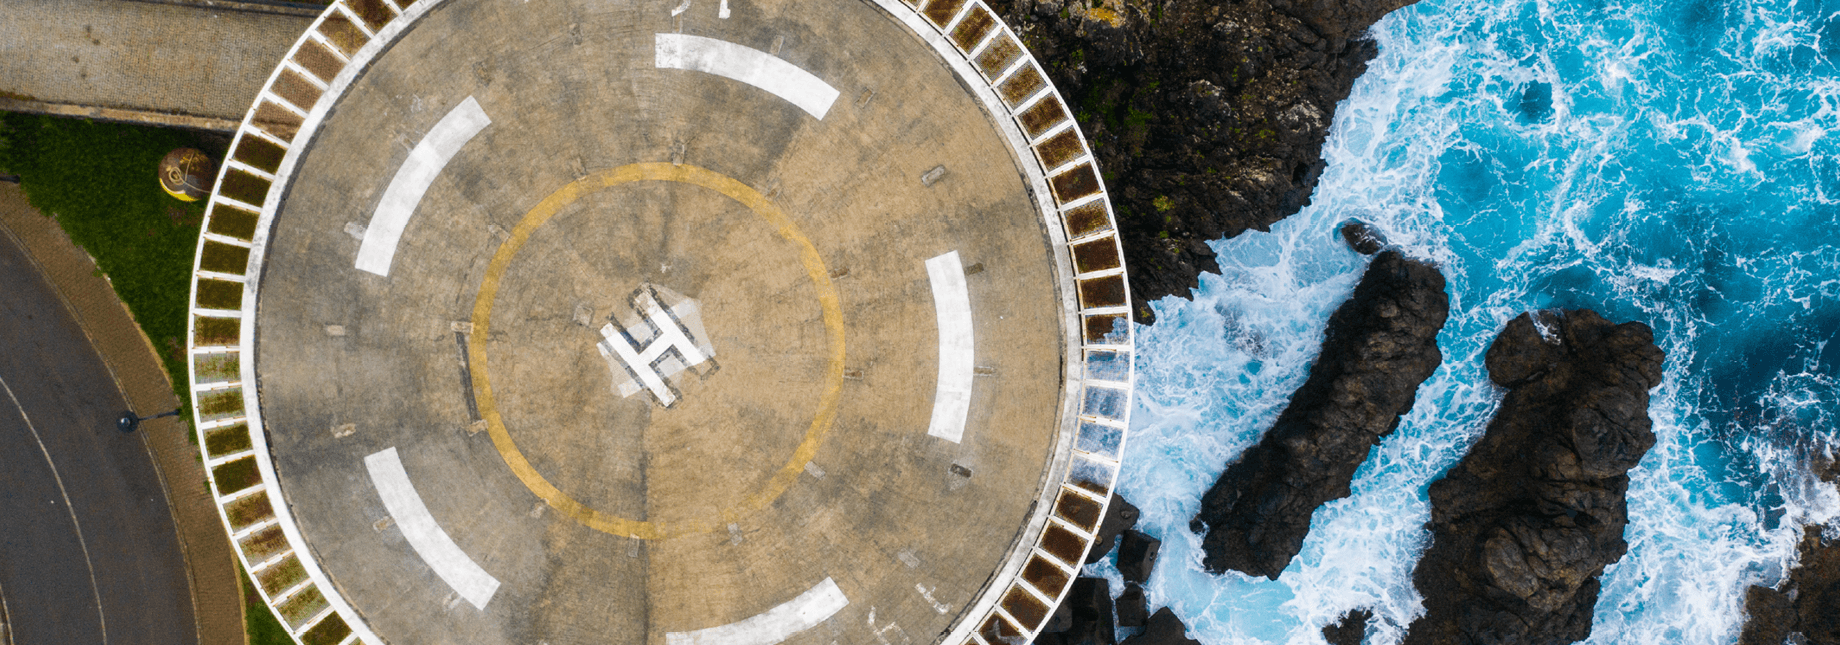 helicopter landing pad near the ocean